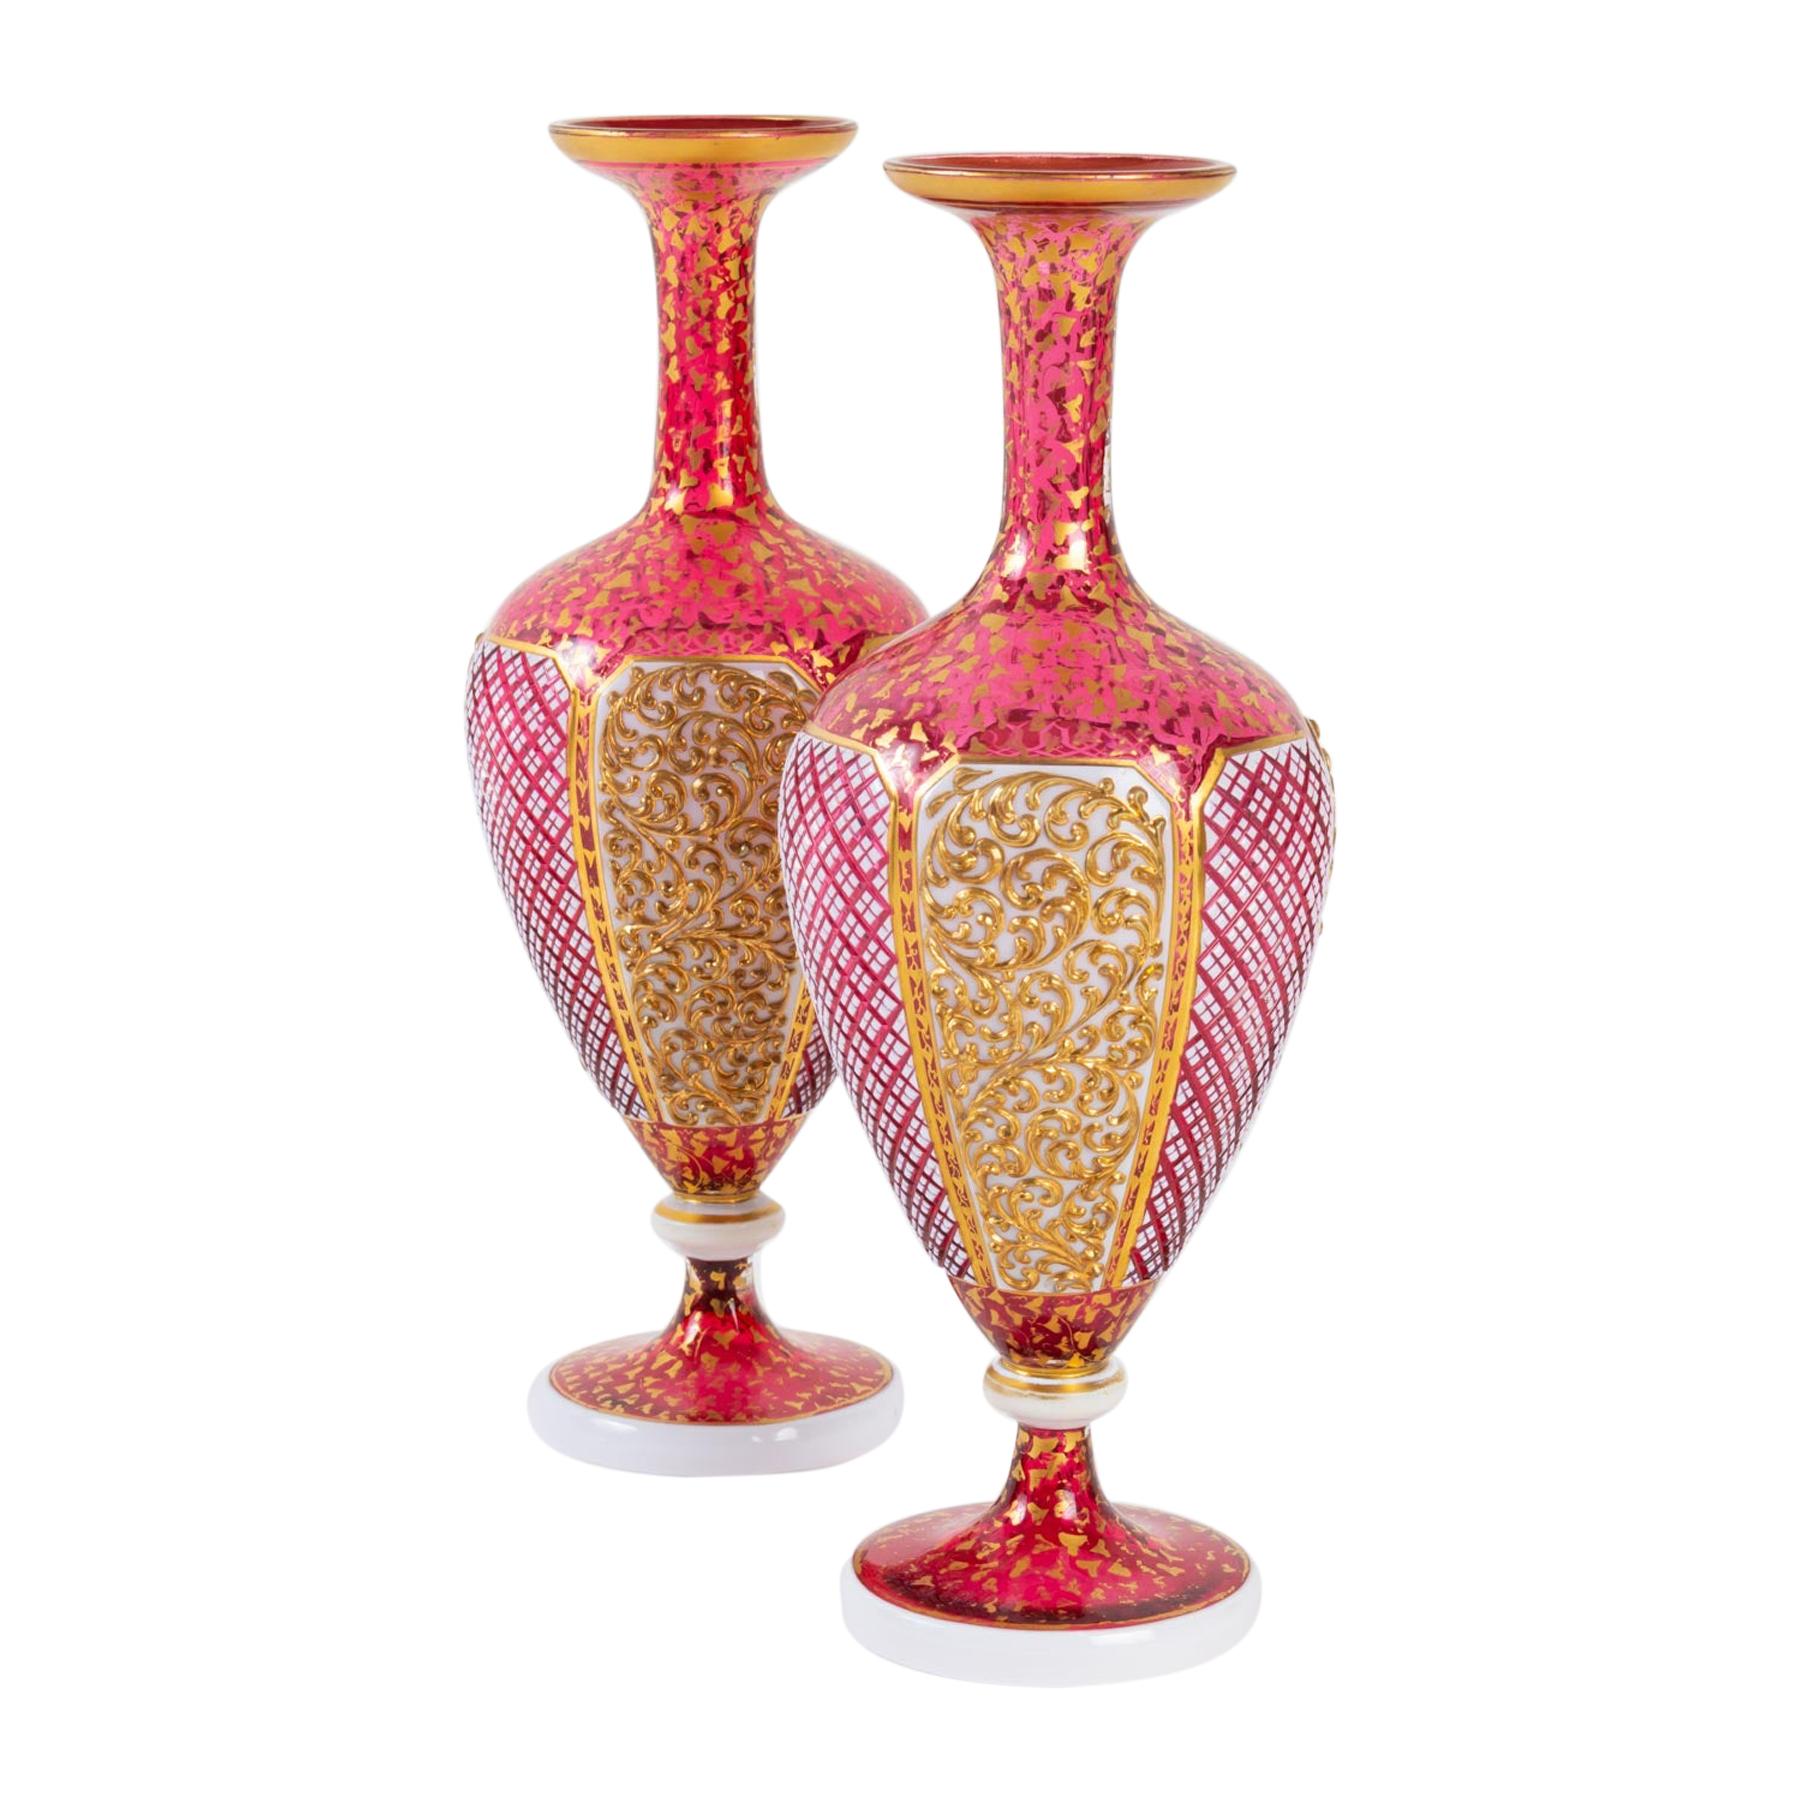 Pair of Red, Gold and White Bohemian Vases, 19th Century, Napoleon III